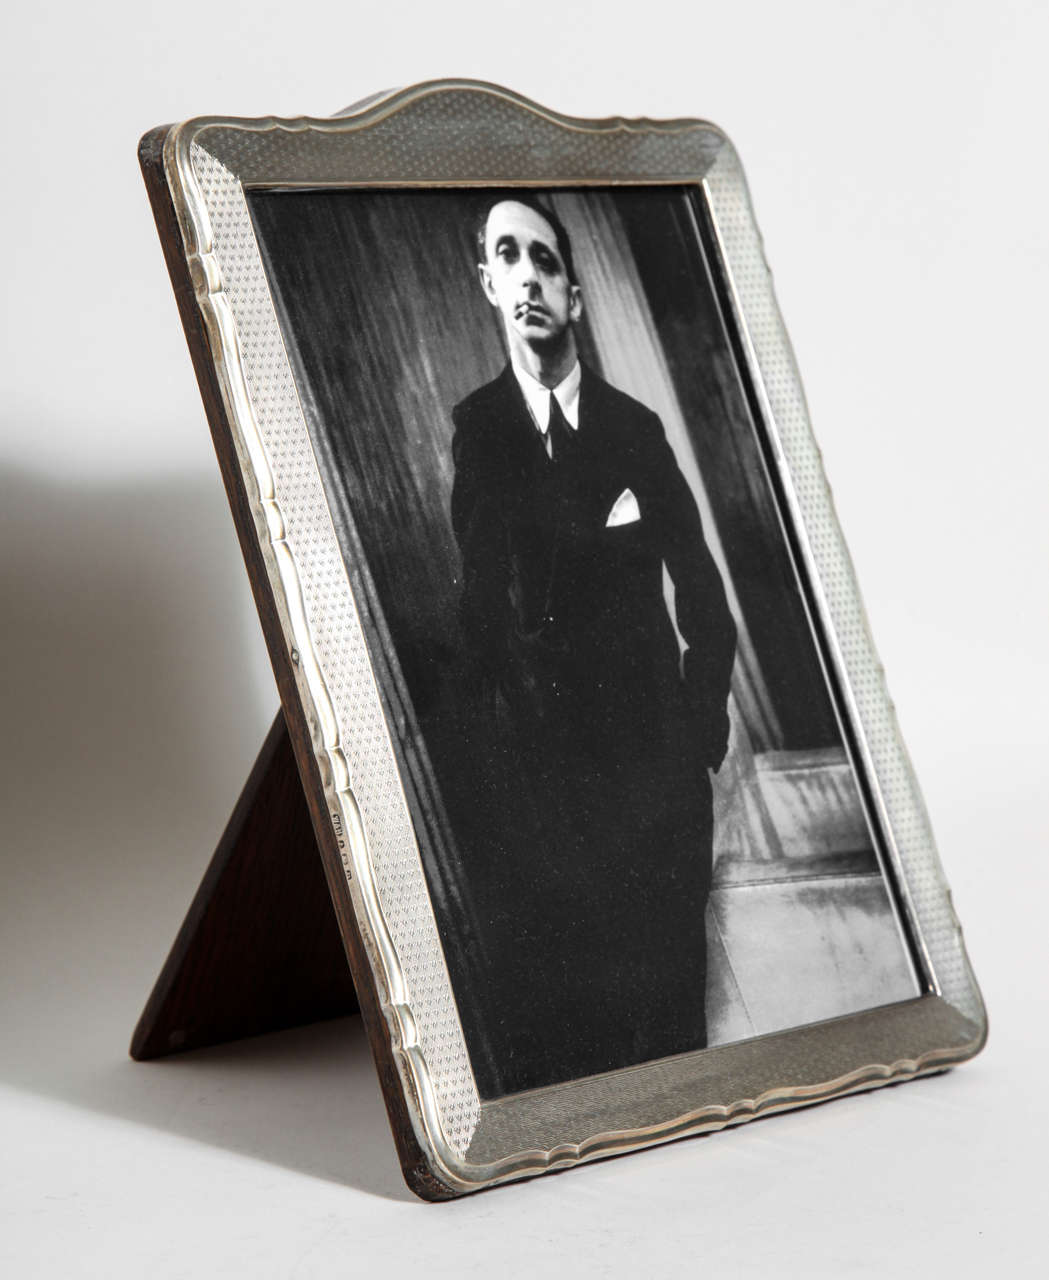 Sterling silver photograph frame with engine-turned decoration on face, arched top and serpentine border and with original oak back and stand.
Hallmarks: 925 silver/ Birmingham/ 1928/ W & H.